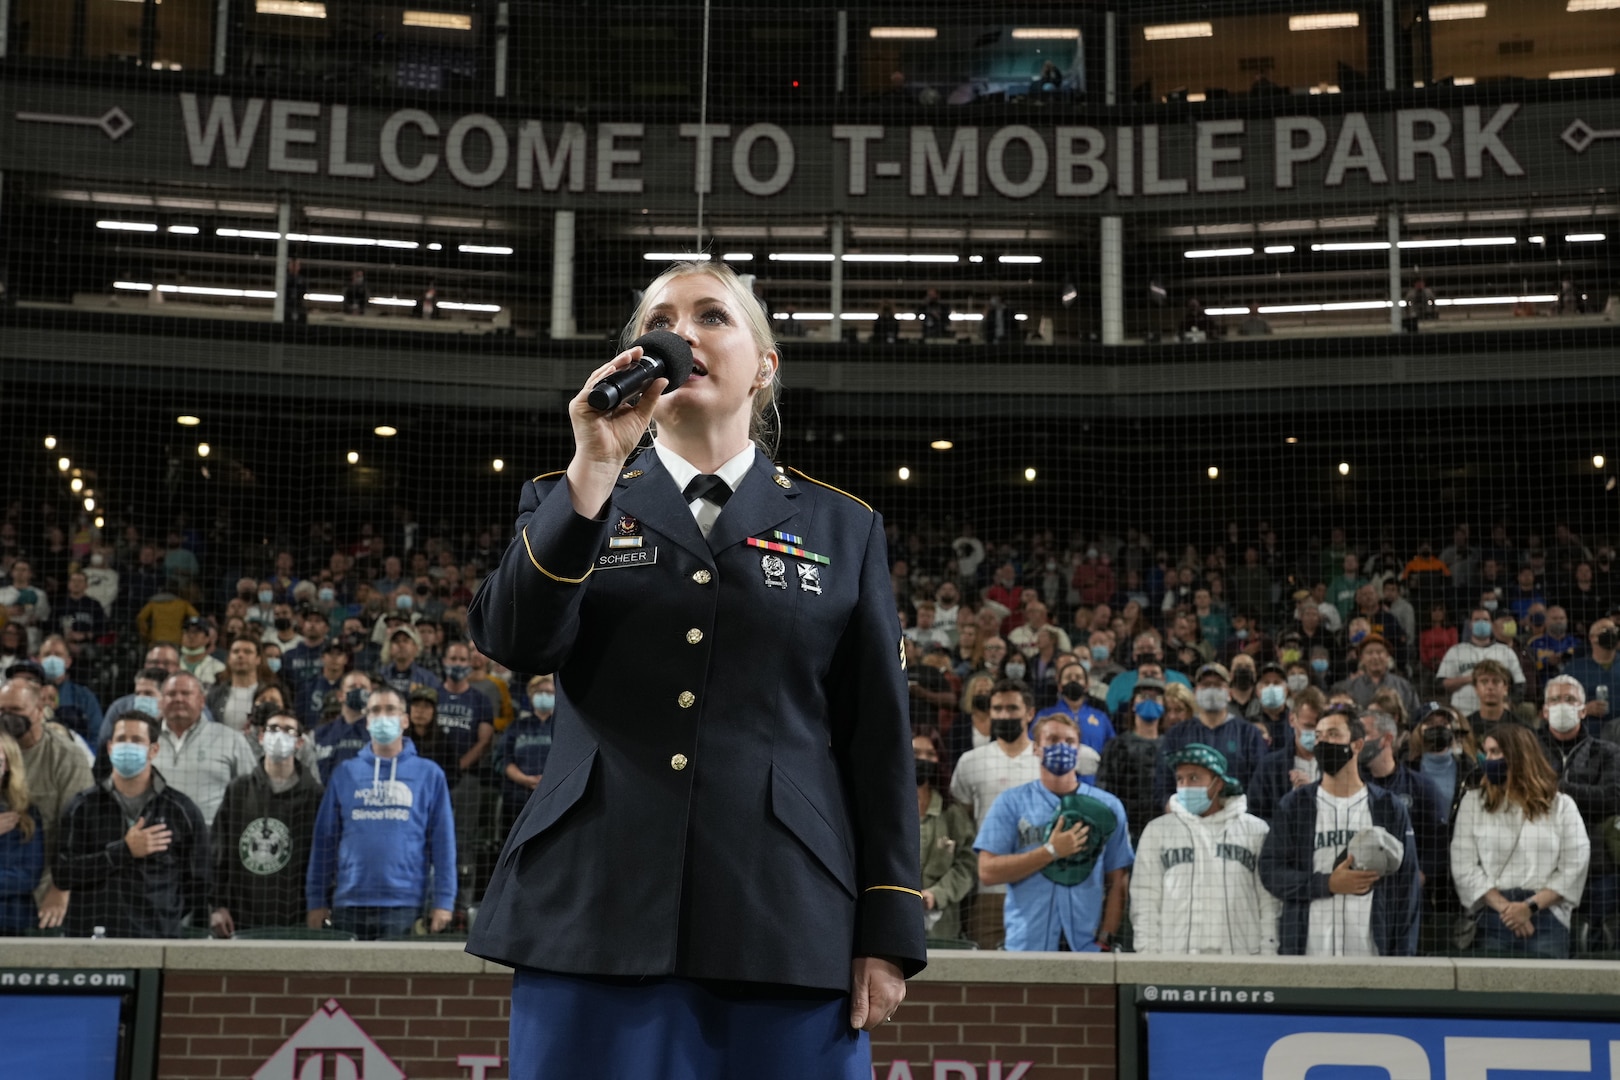 Sgt. Tricia Scheer, a vocalist with the 133rd Army National Guard Band, Washington Army National Guard, sings the national anthem before the Seattle Mariners play the Arizona Diamondbacks at T-Mobile Park, Seattle, Wash., Sept. 10, 2021.